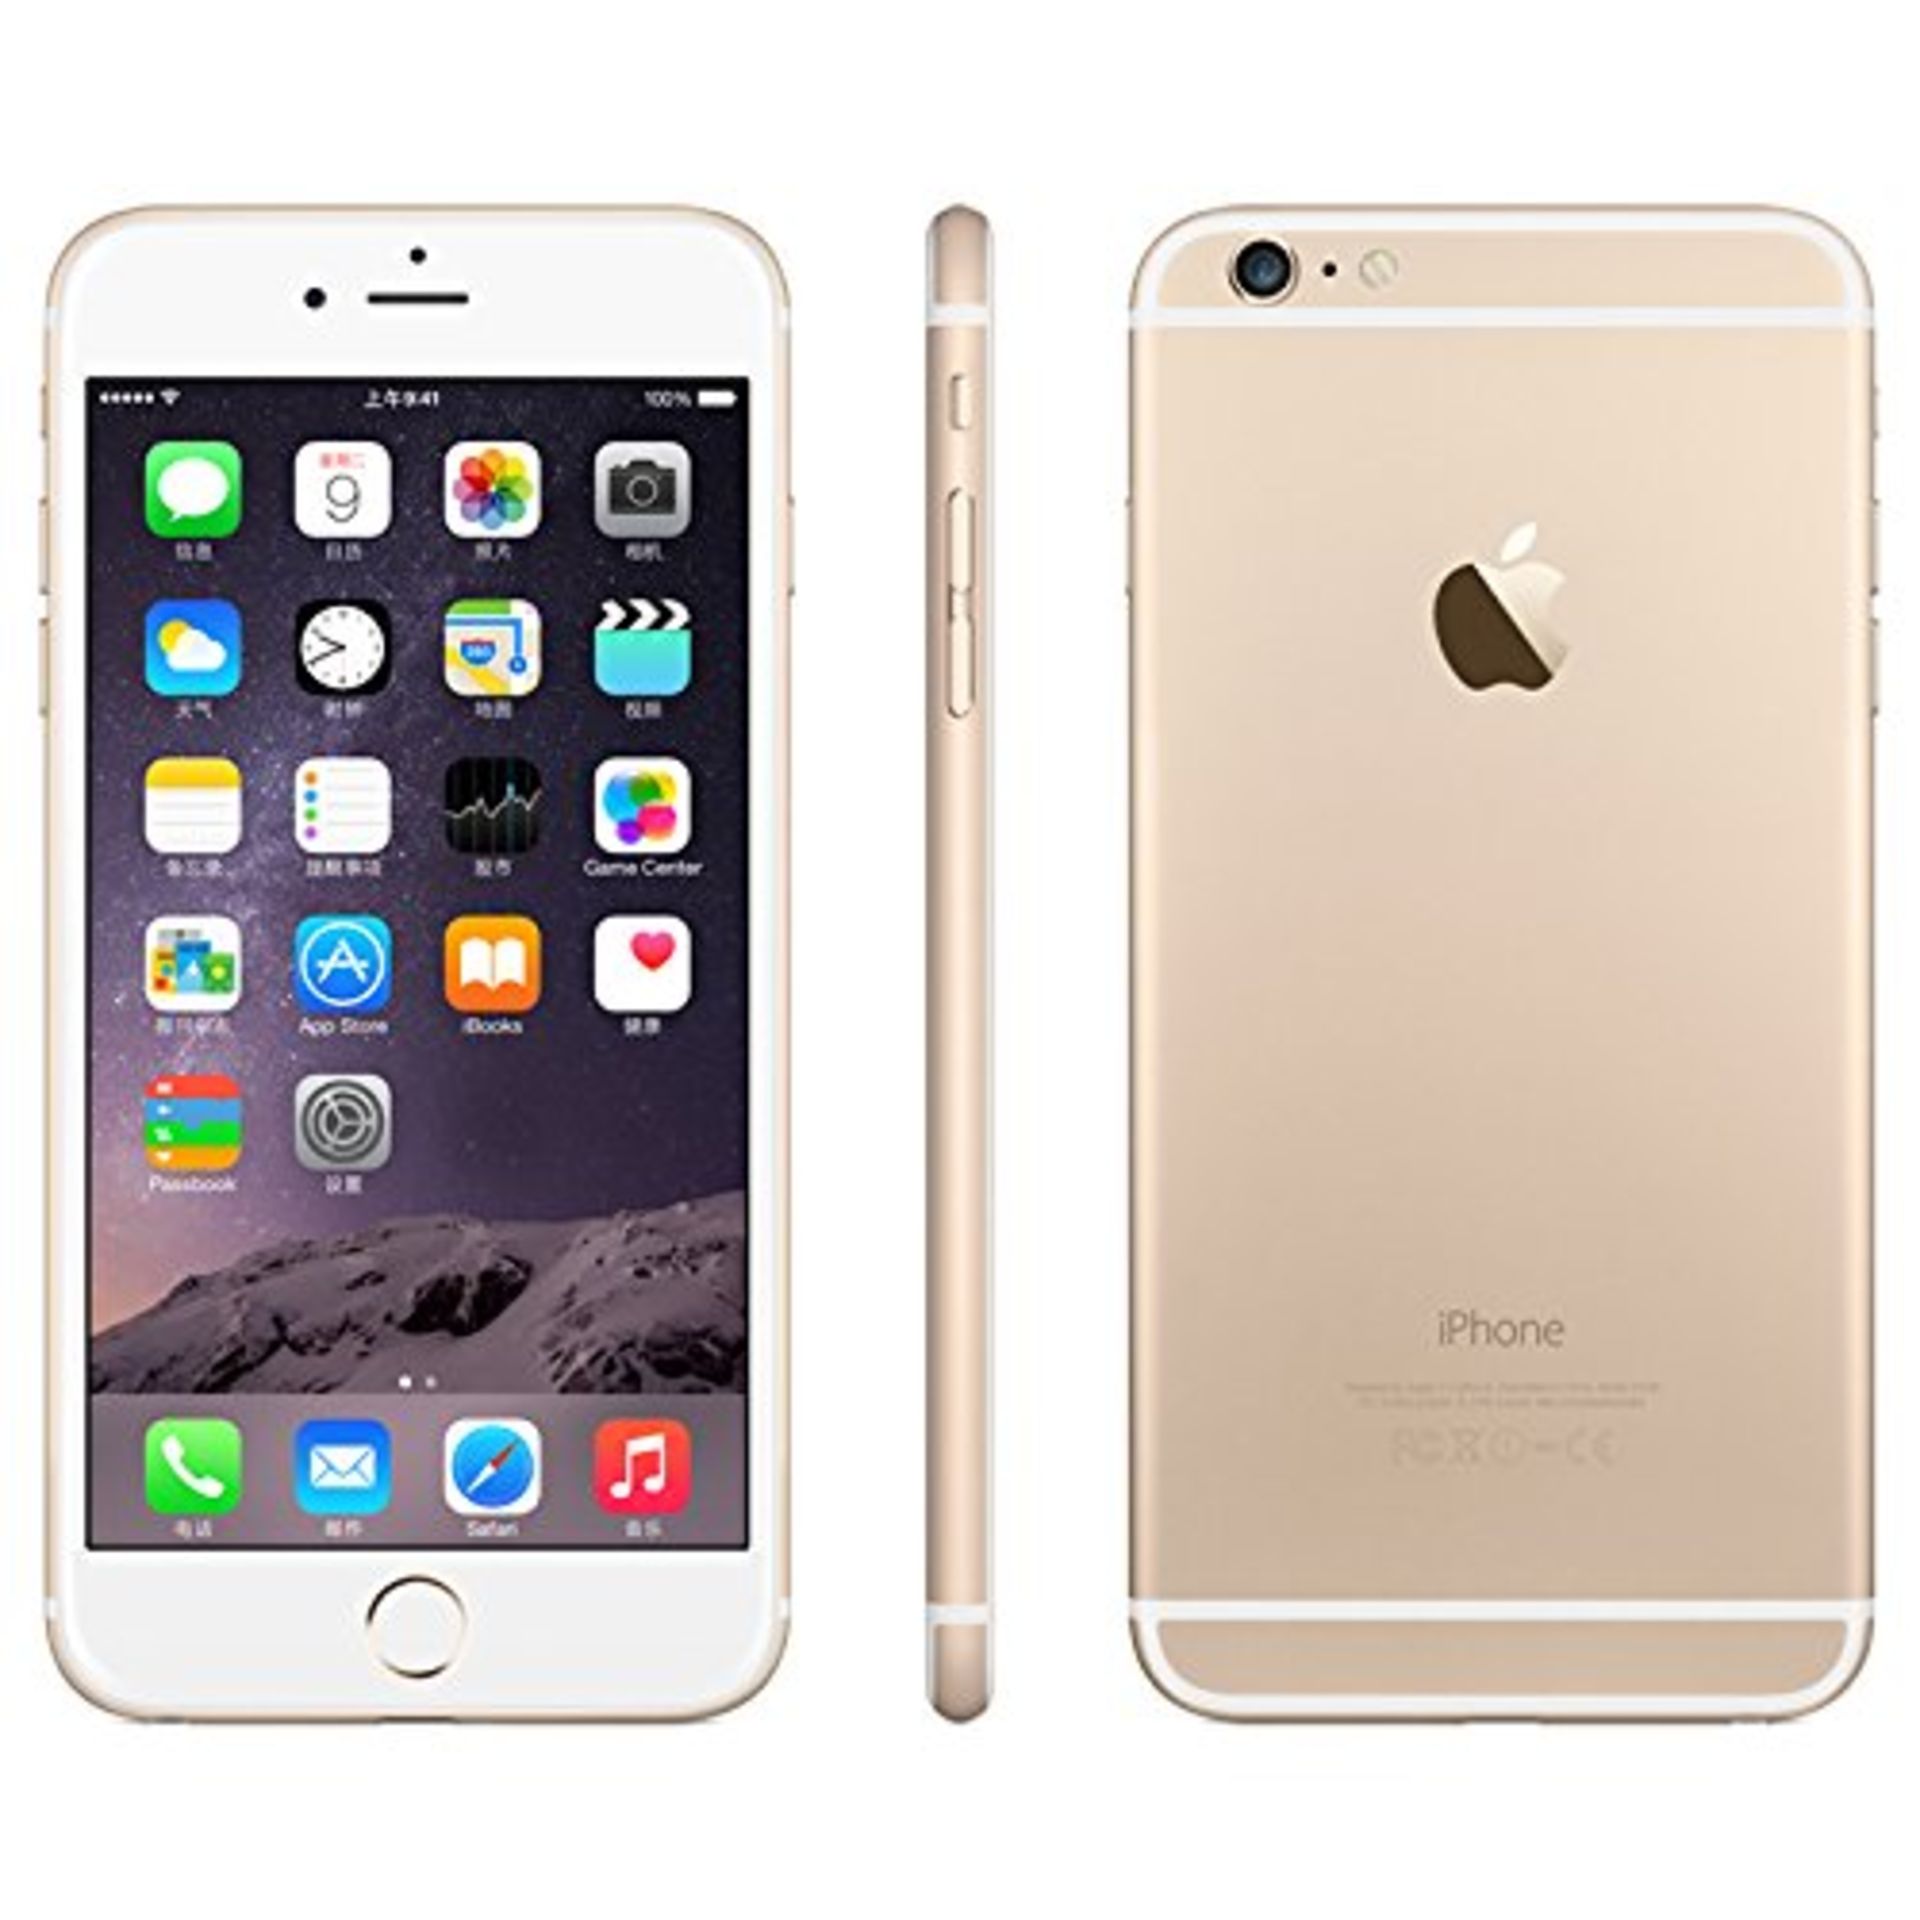 Grade A Apple iphone 6 plus 16GB Colours May Vary Touch ID Item available approx 15 working days